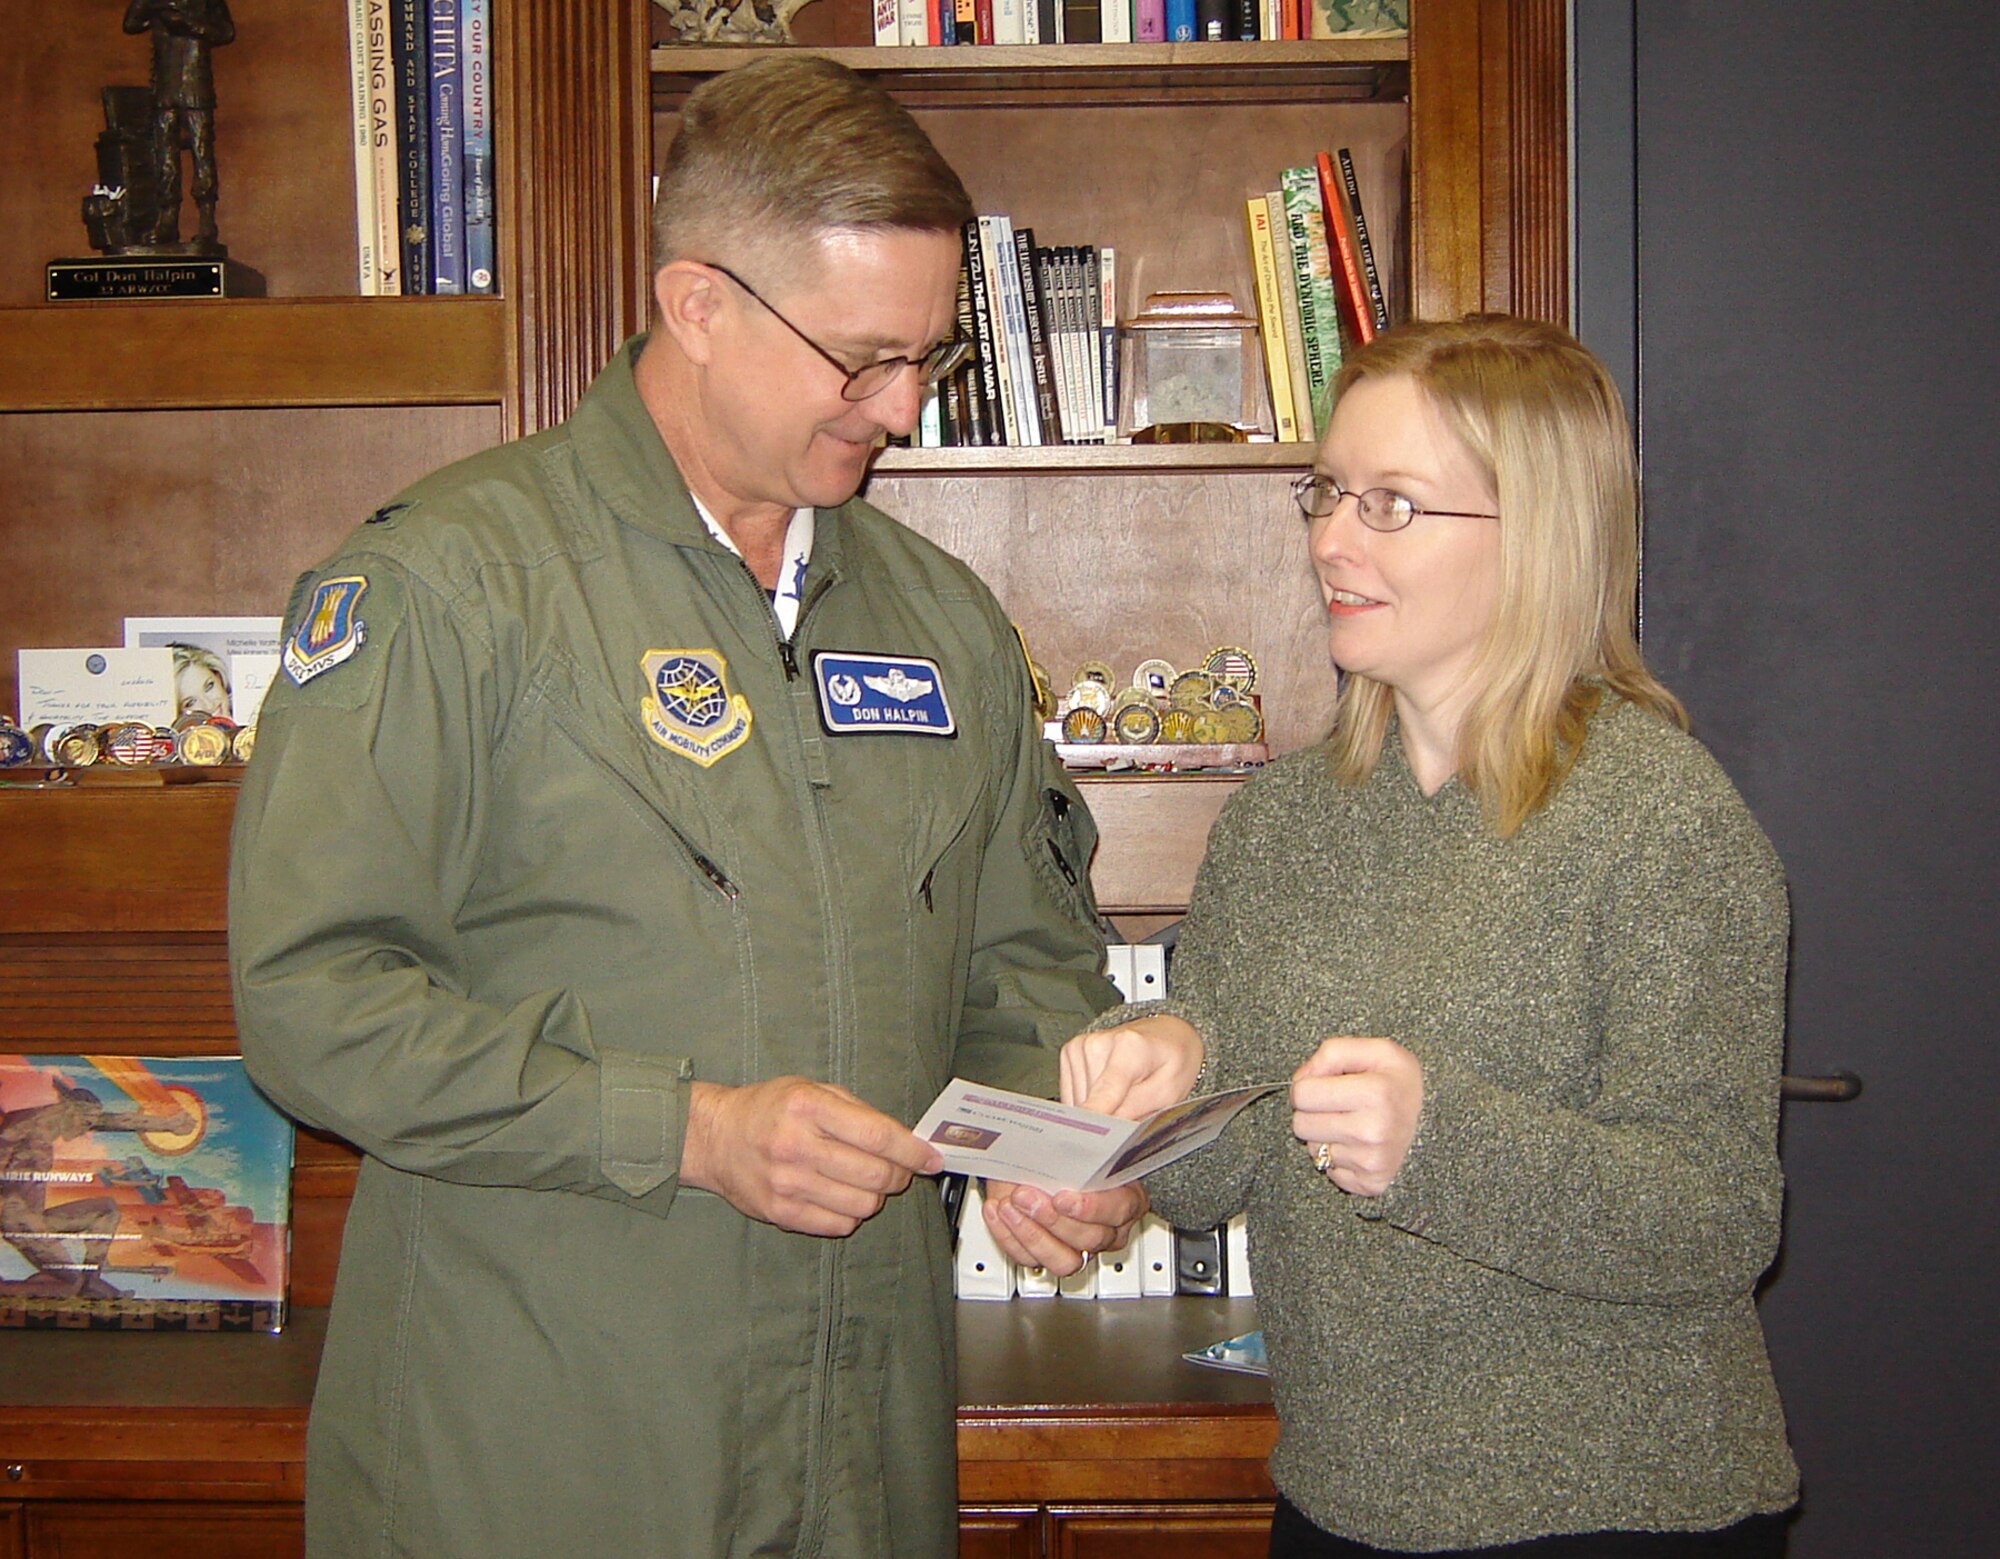 Feb. 16, Amy Myer, right, McConnell Officers’ Spouses’ Charitable Association president, hands Col. Donald J. Halpin, 22nd Air Refueling Wing commander, an invitation the upcoming MOSCA Charity Auction. The Fifth Annual MOSCA Charity Auction will be held March 3 at the Terradyne Country Club, Andover. The theme for the event is “United We Stand.” The silent auction will begin at 6 p.m. and the live auction will begin at 7:30 p.m. Dress is semi-formal. There will be hors d’oeuvres and a cash bar. Cost is $35 per person in advance or $40 at the door/$50per couple or $60 at the door. Proceeds from the auction benefit base organizations such as the MOSCA Scholarship program, Airman and Family Readiness programs and more.